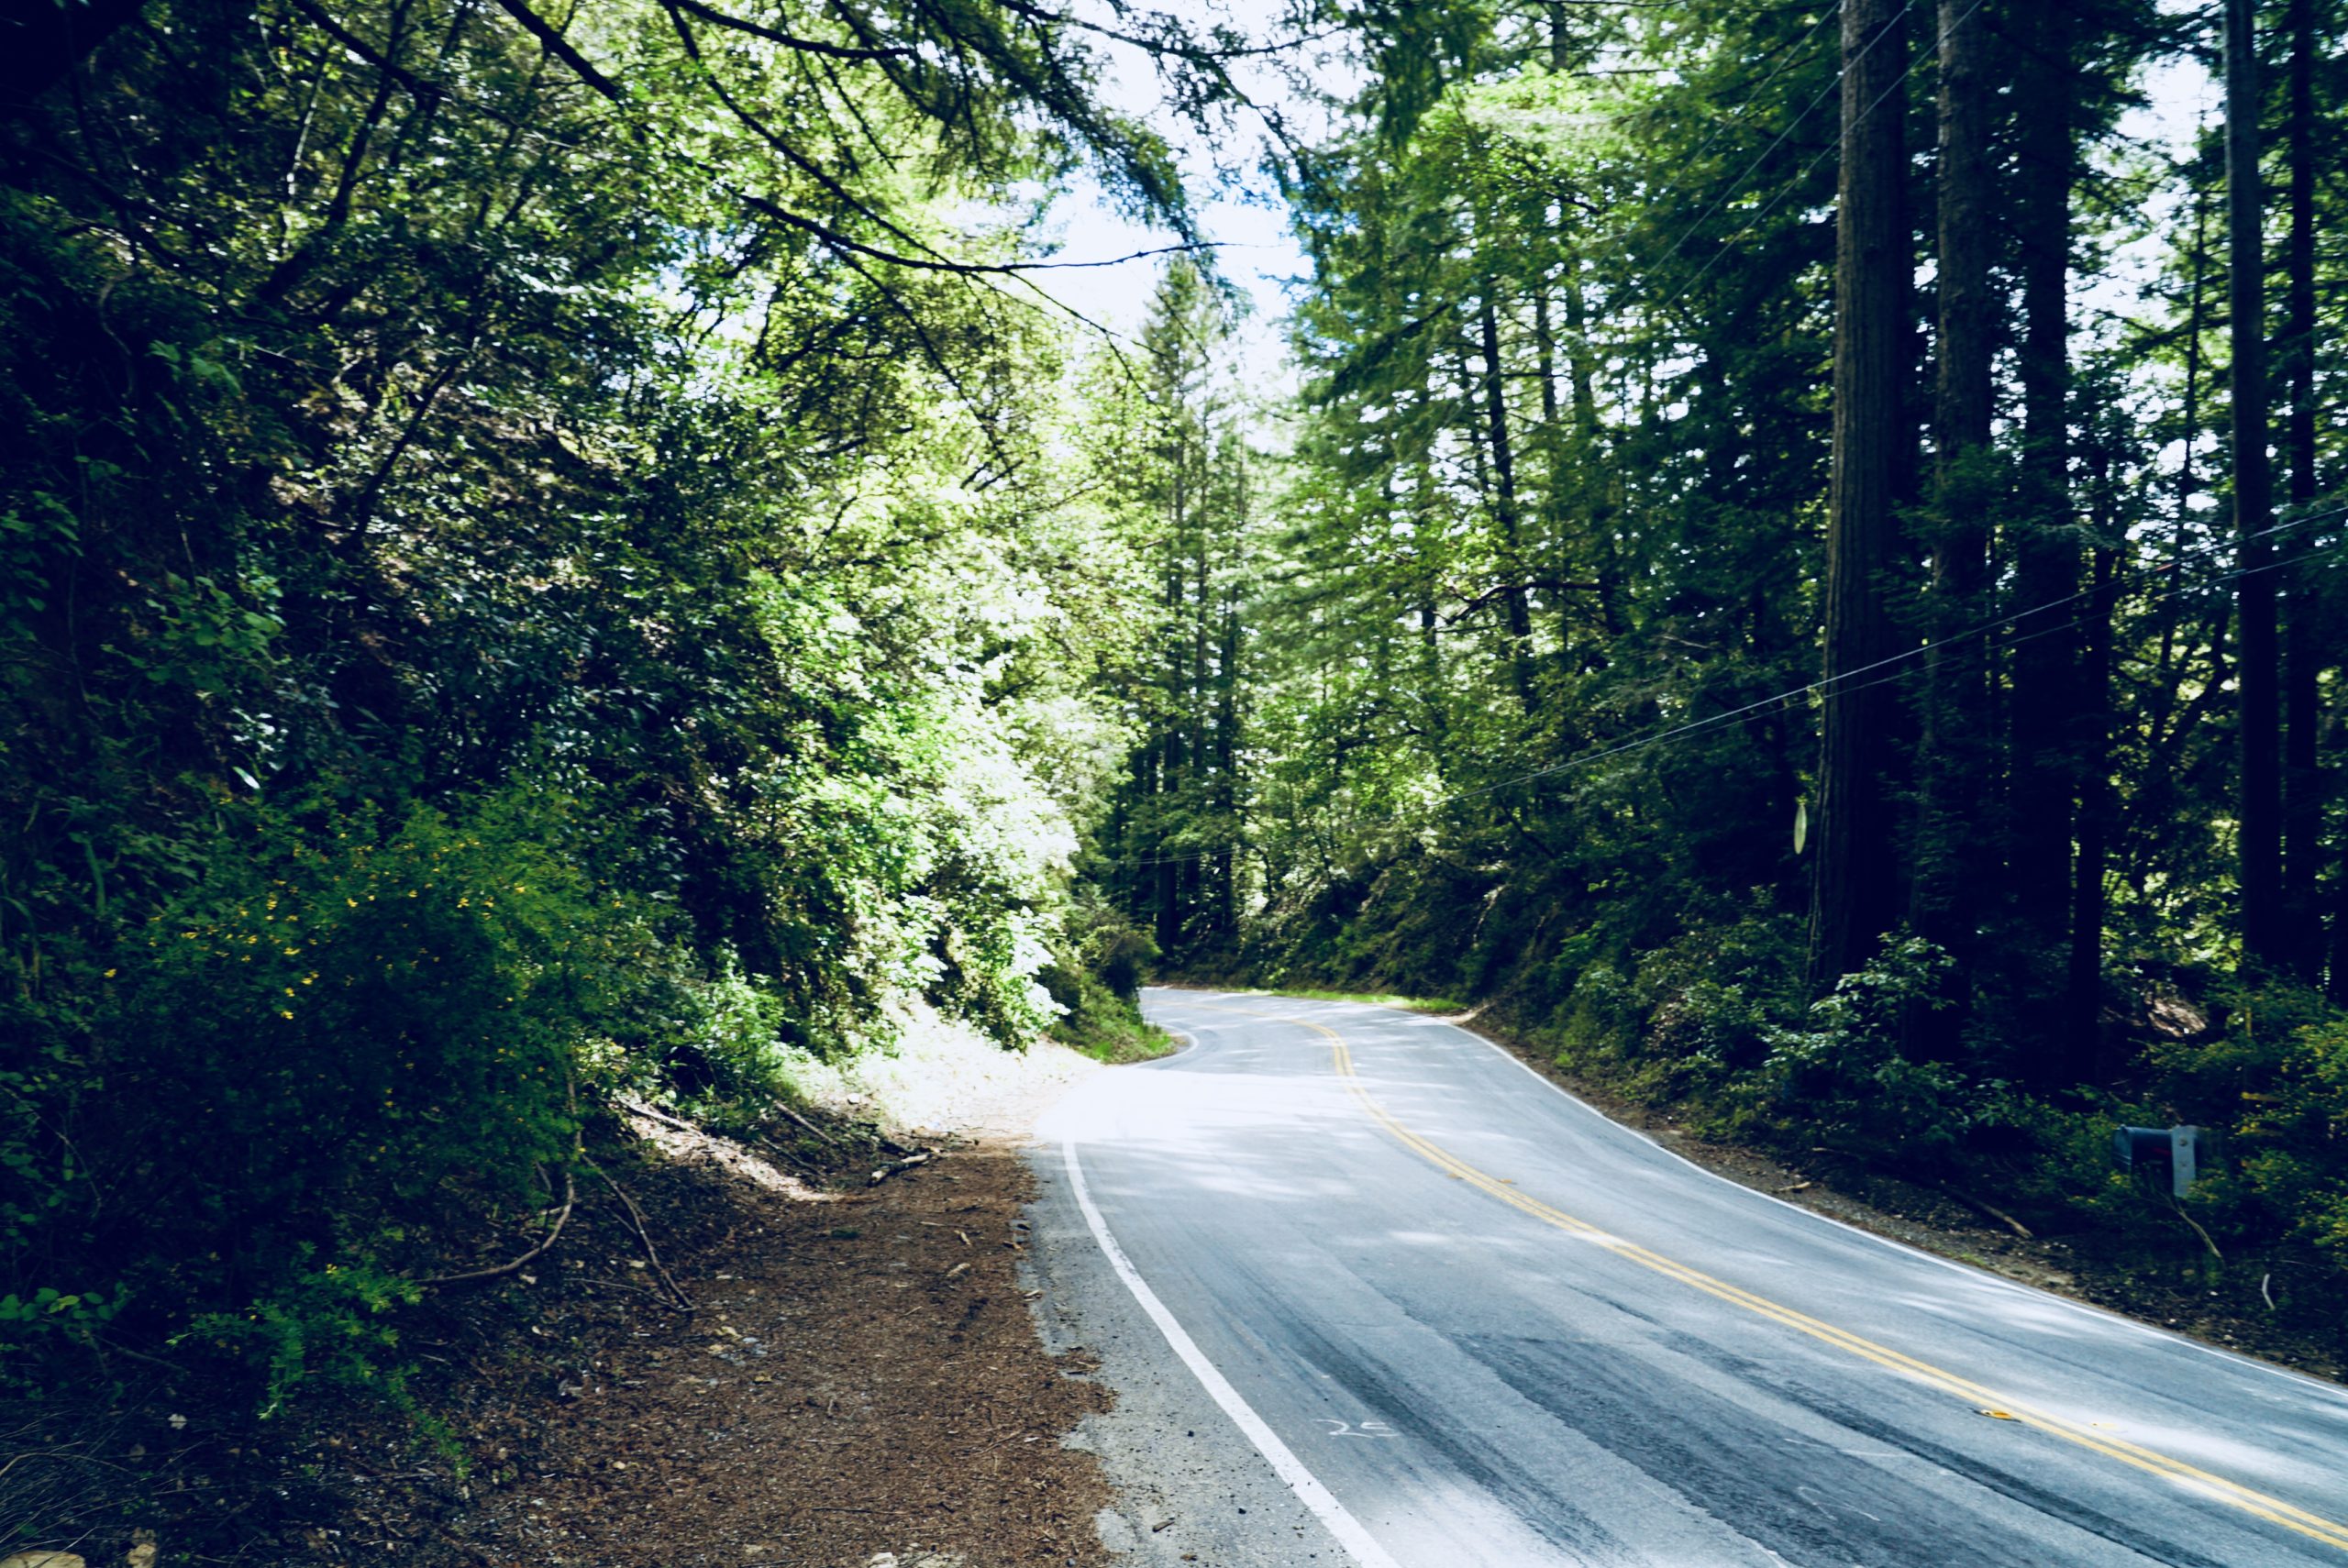 winding road with tall trees